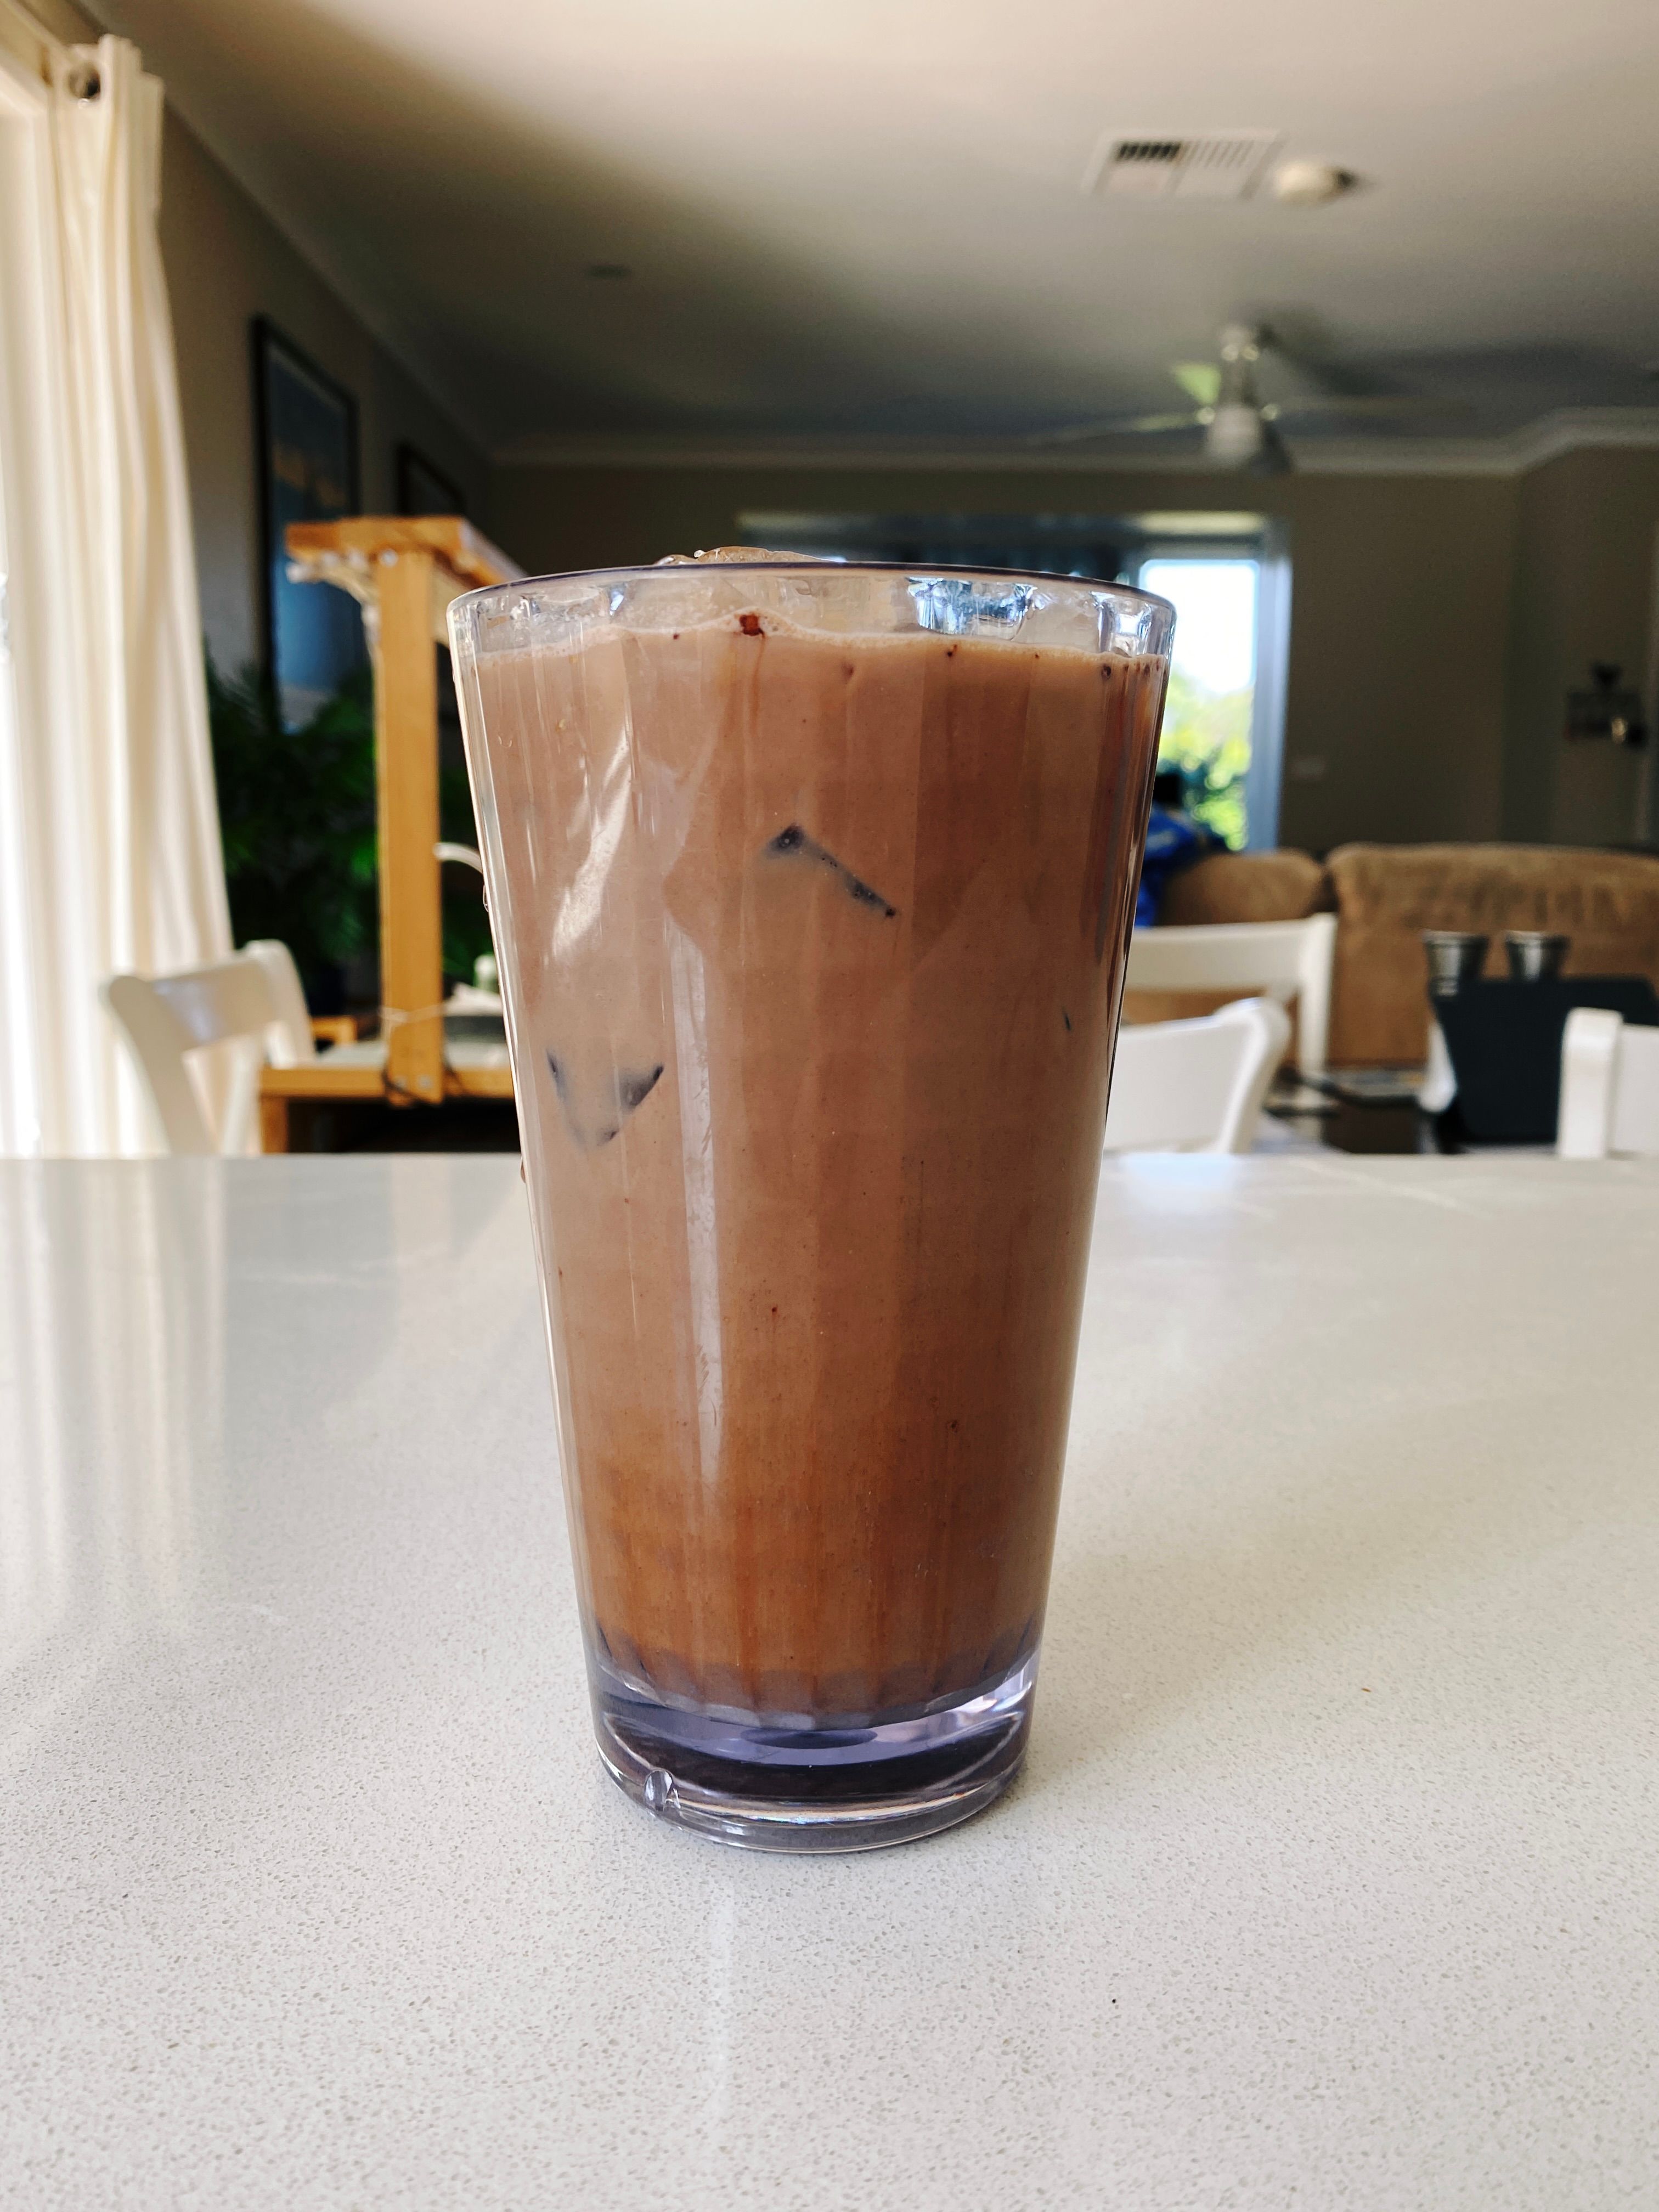 A photo of a tall plastic cup of iced mocha sitting on a benchtop.